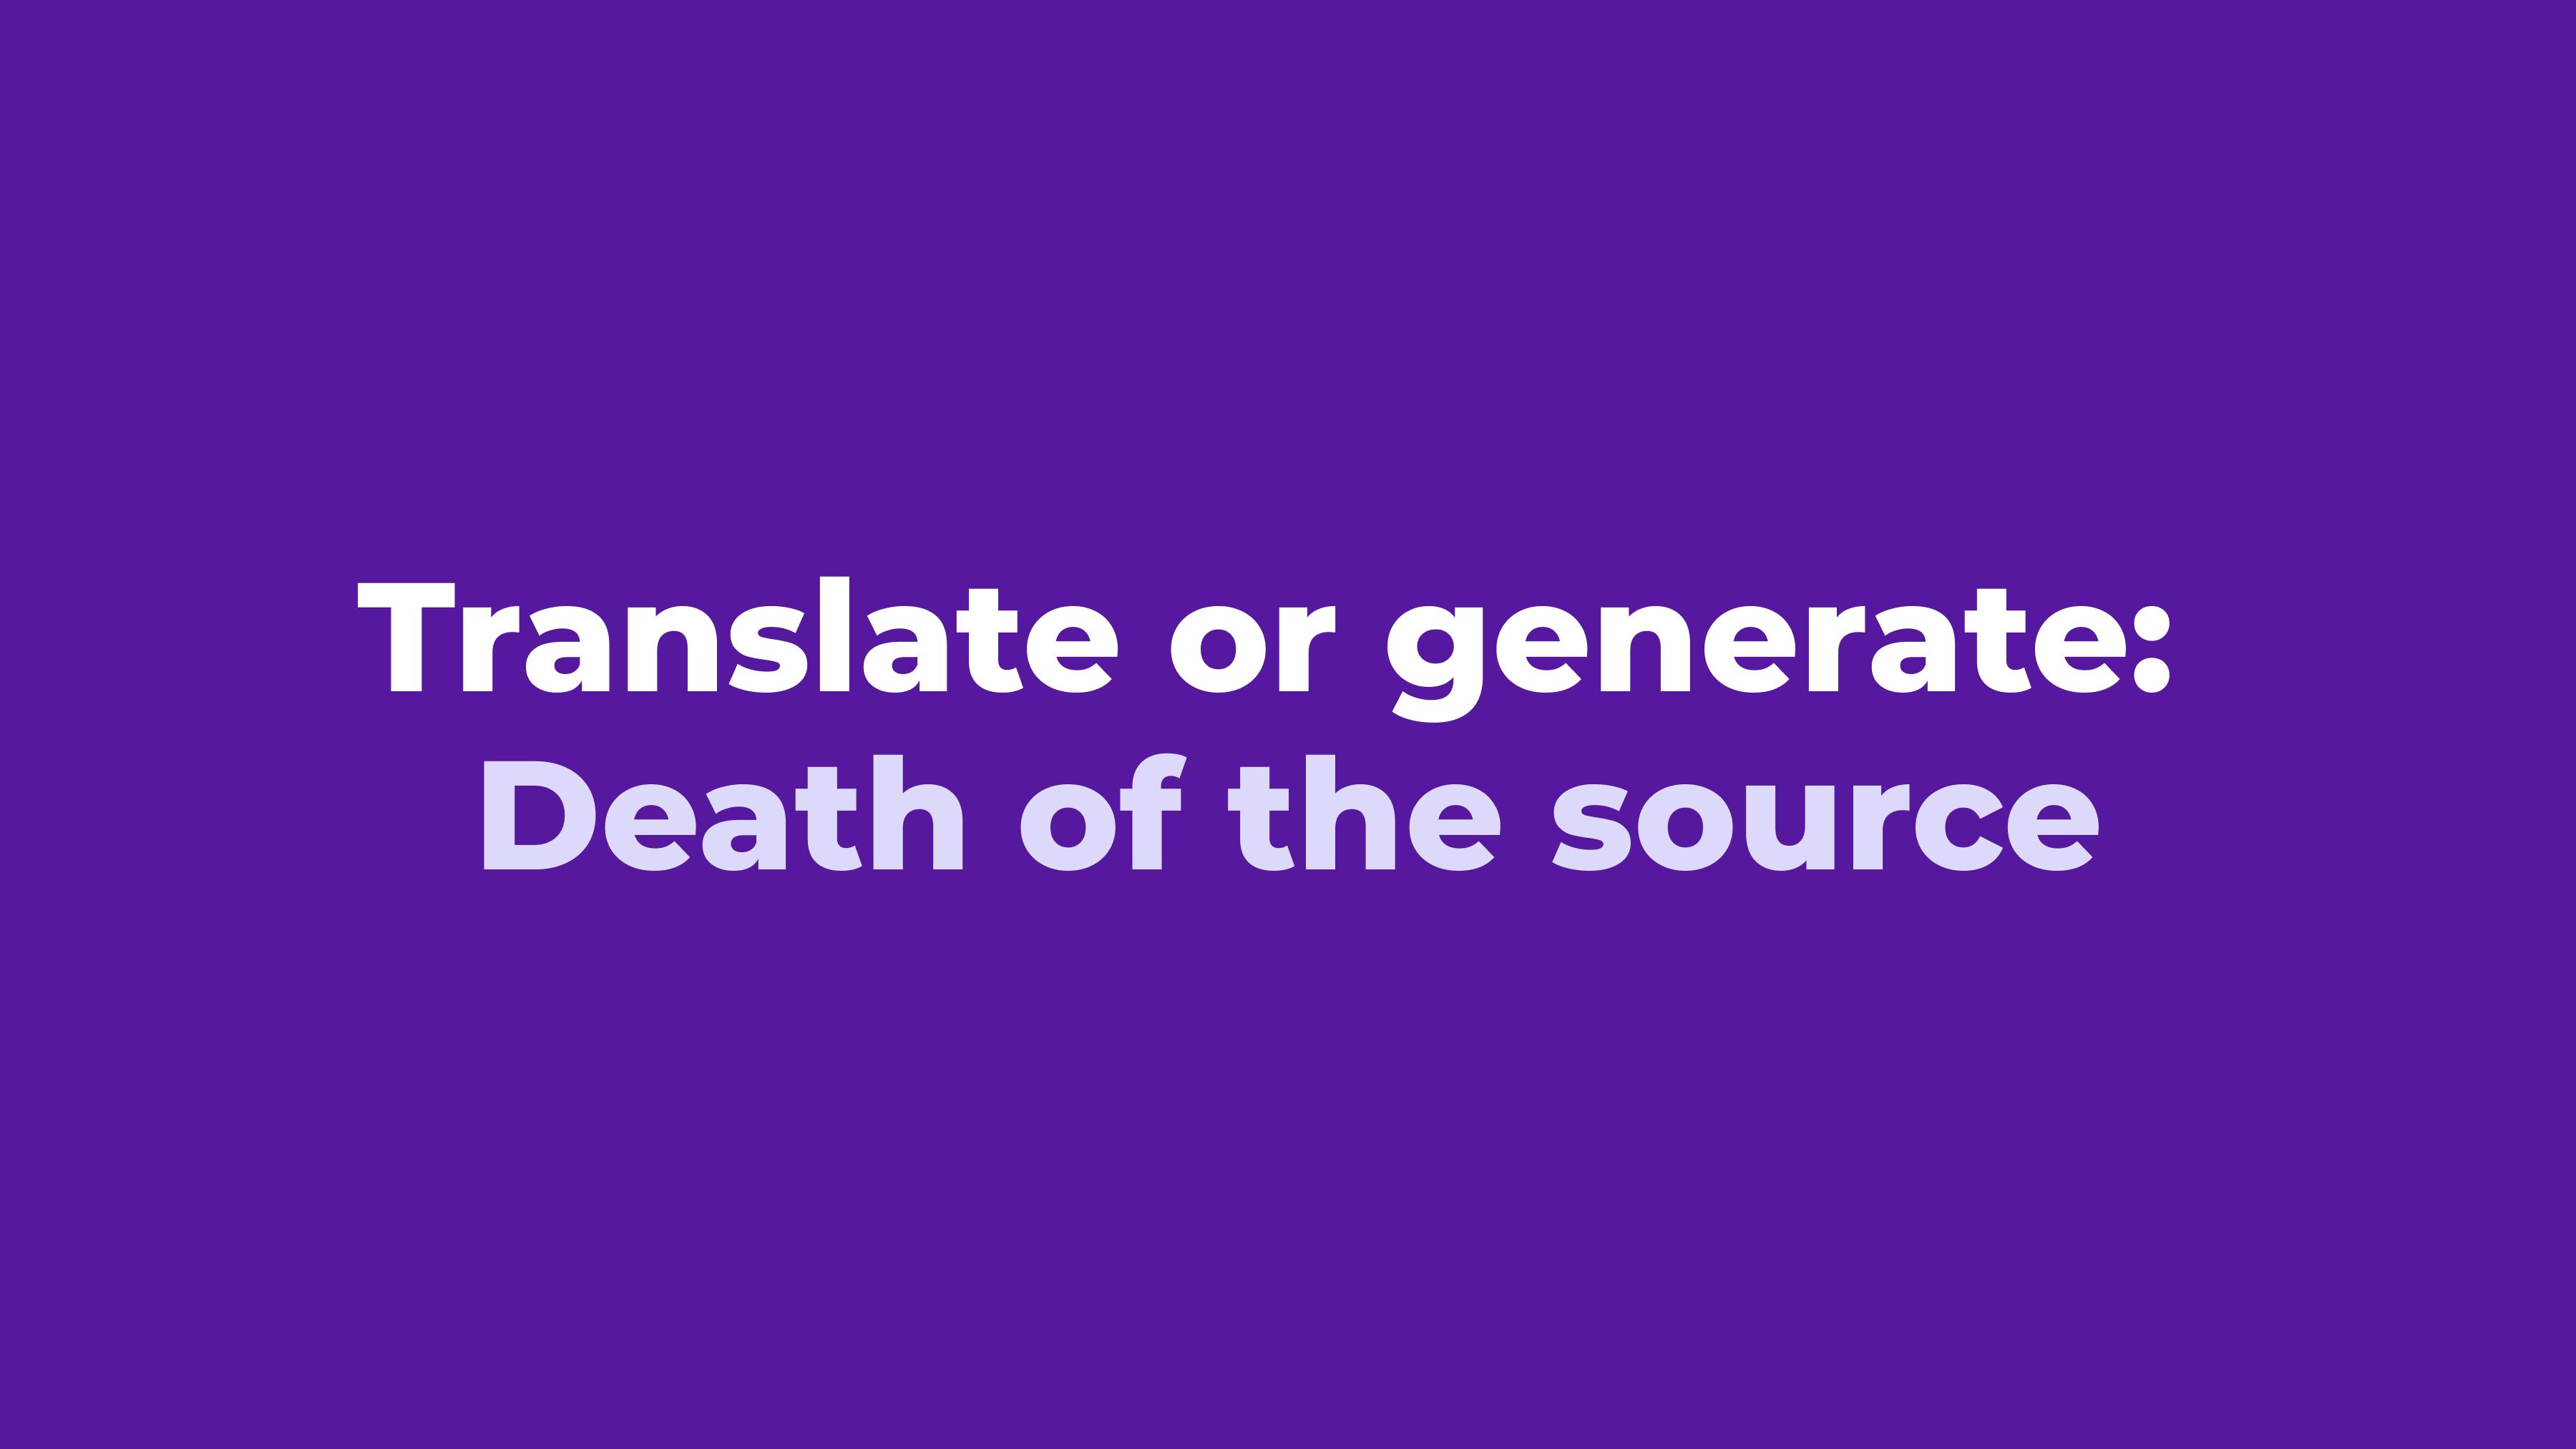 Webinar on demand: Translate or generate: Death of the source